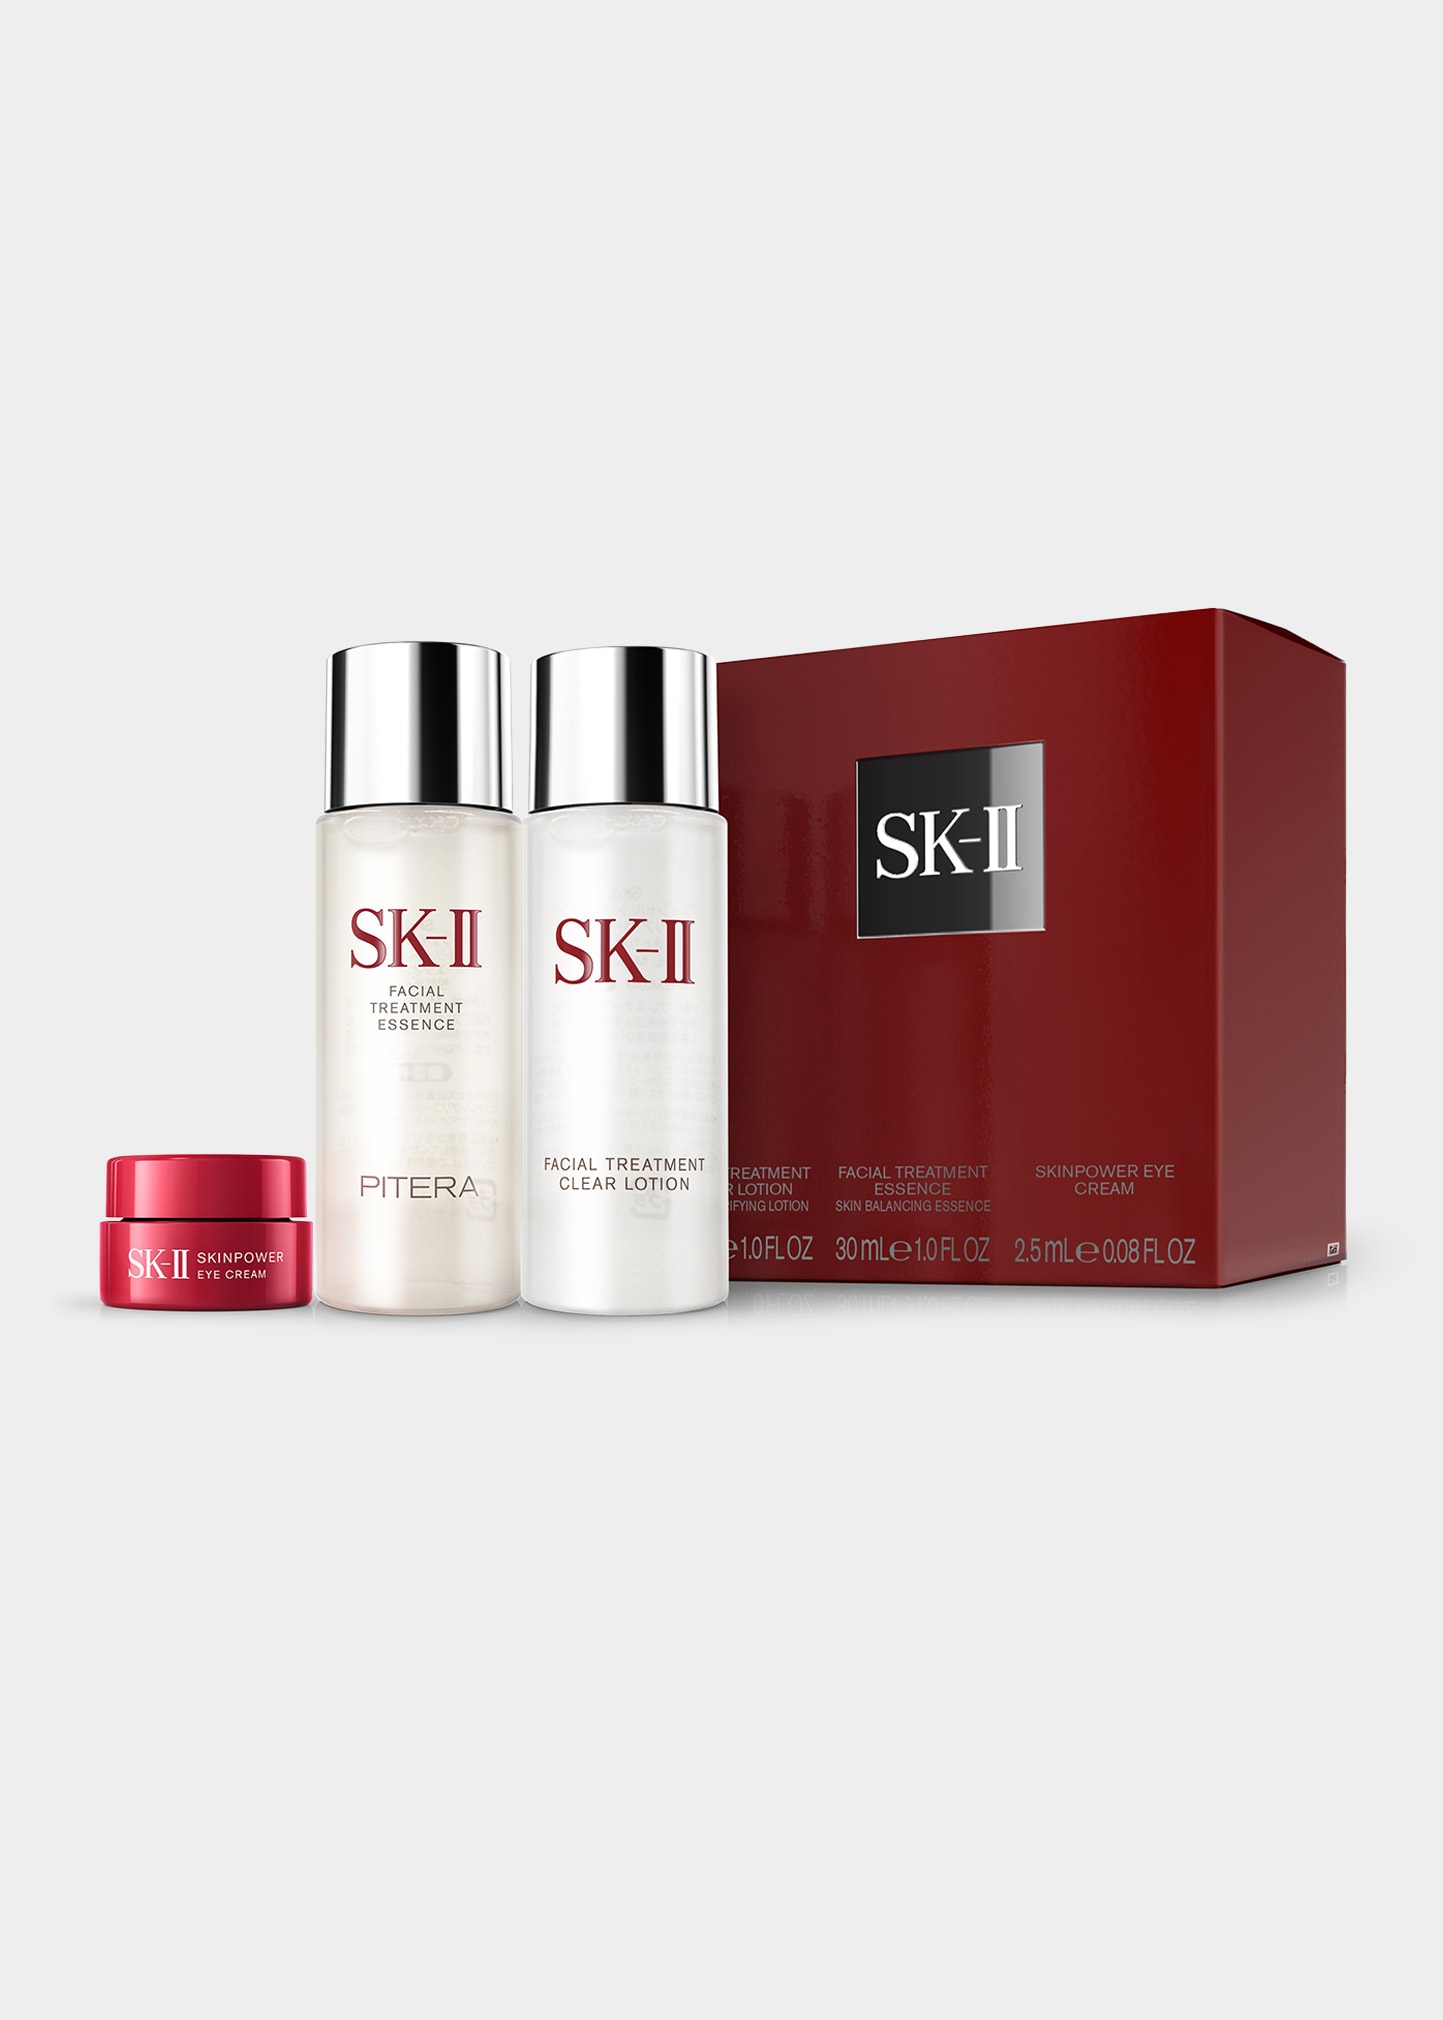 Pitera Experience Kit 1, Yours with any $250 SK-II Purchase